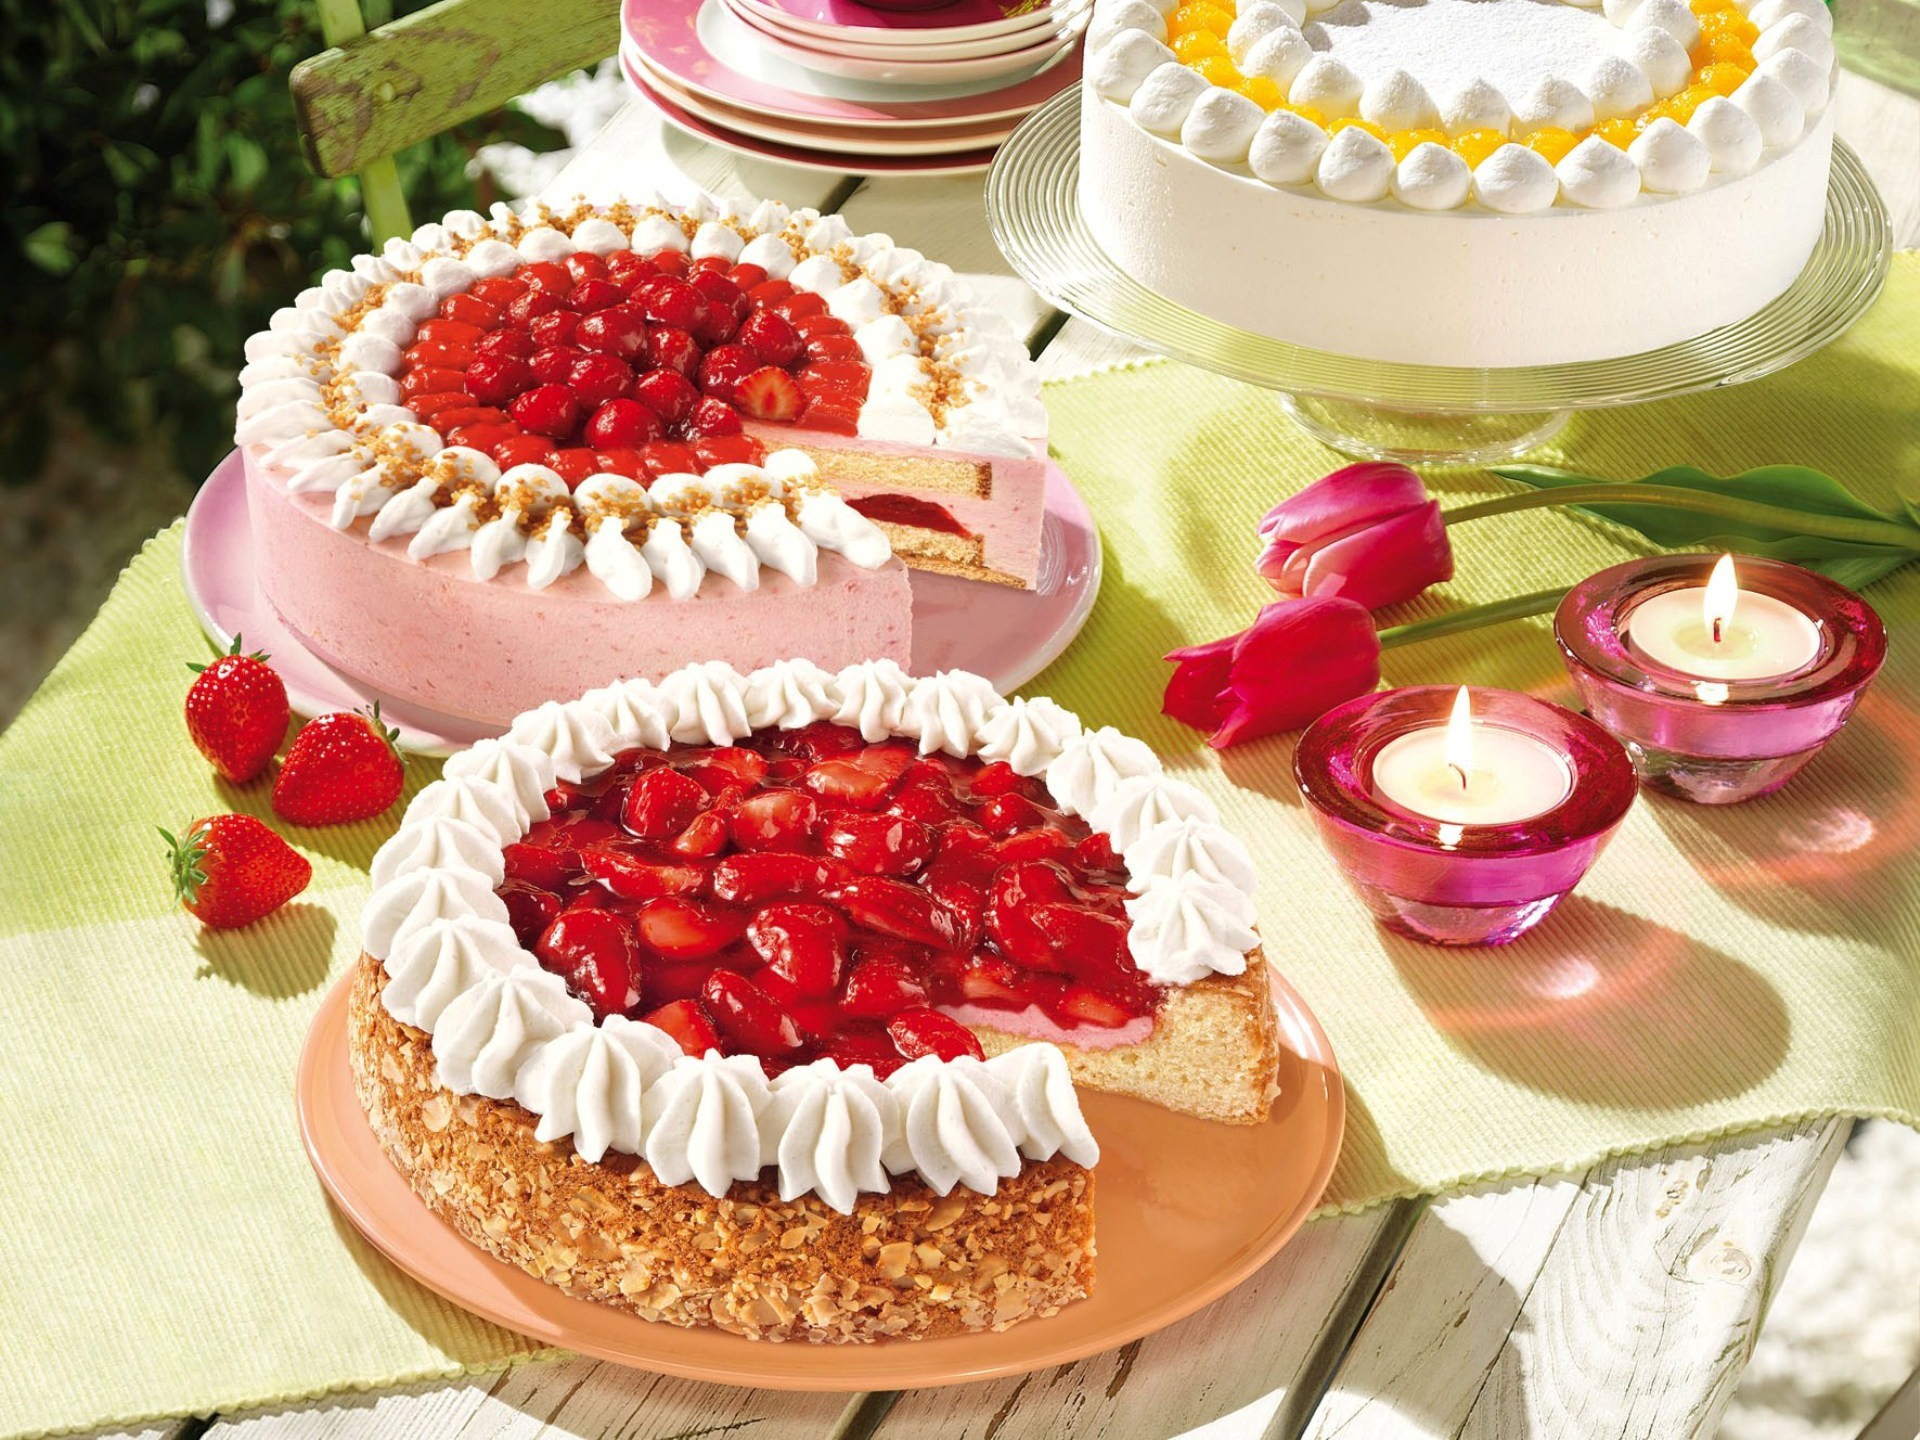 Delicious strawberry cake HD wallpapers #23 - 1920x1440